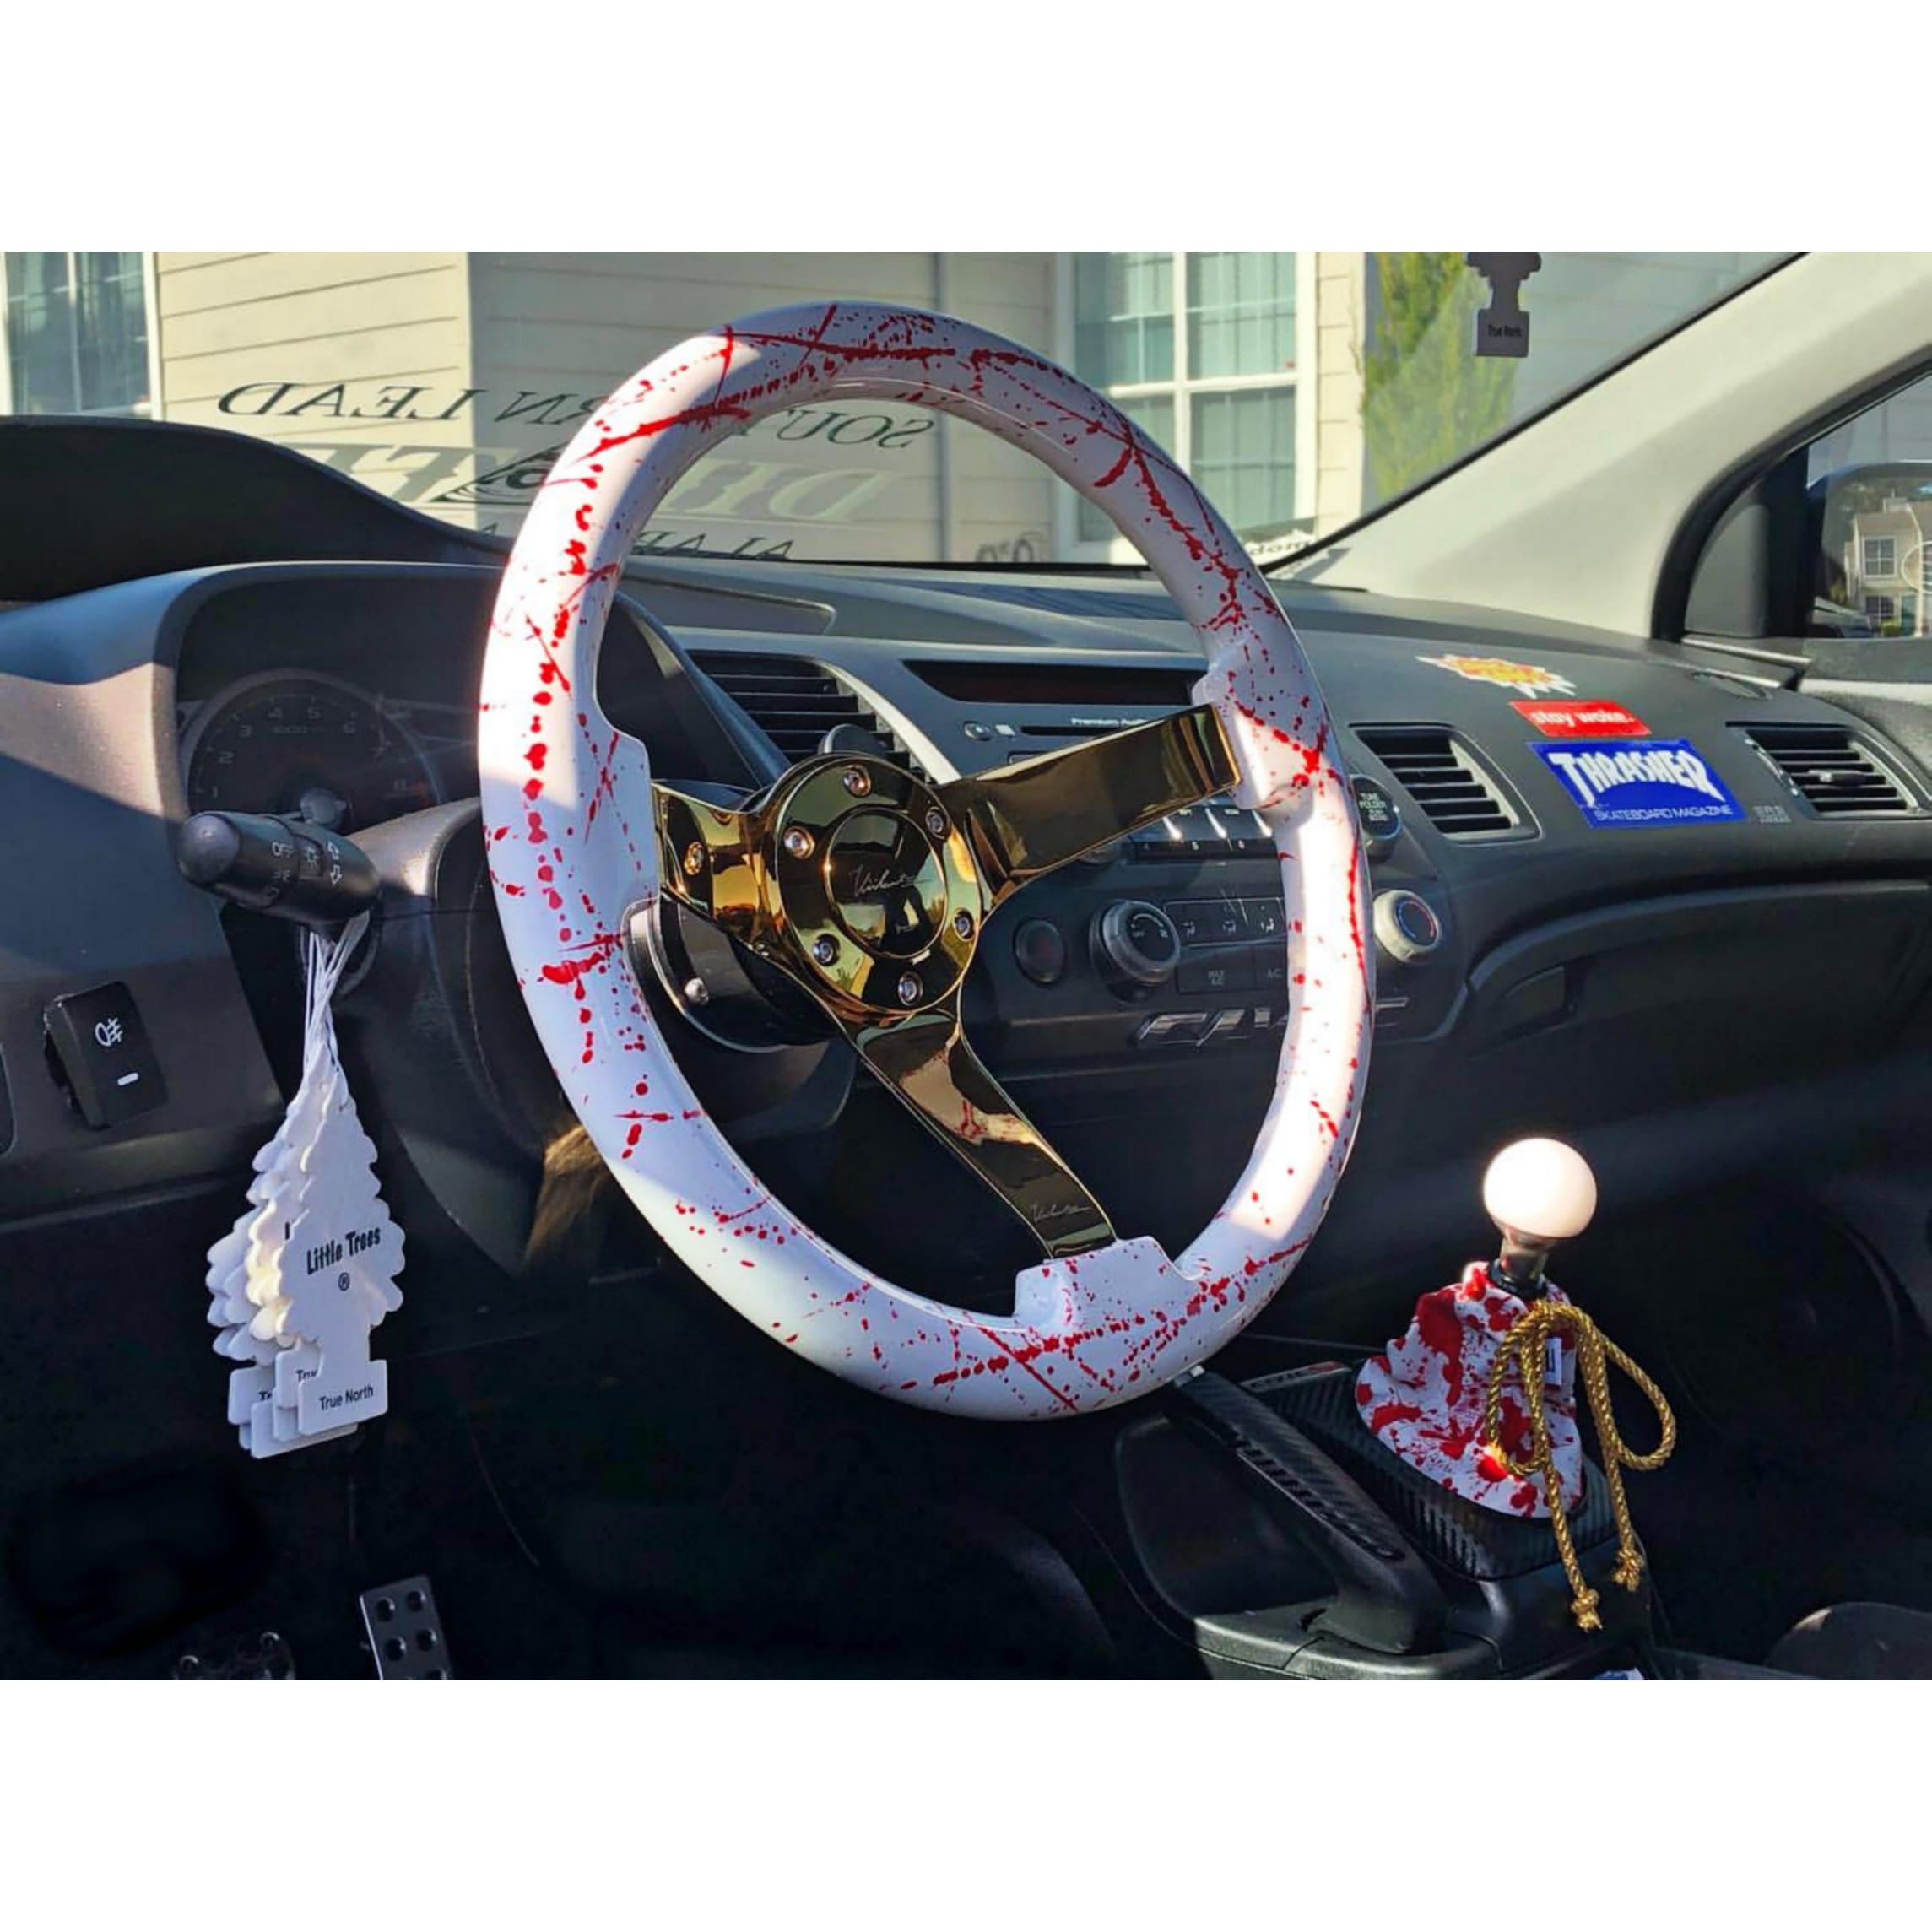 Anime Steering Wheel Cover  The Perfect Car Accessory for Anime Fans   EzCustomcar